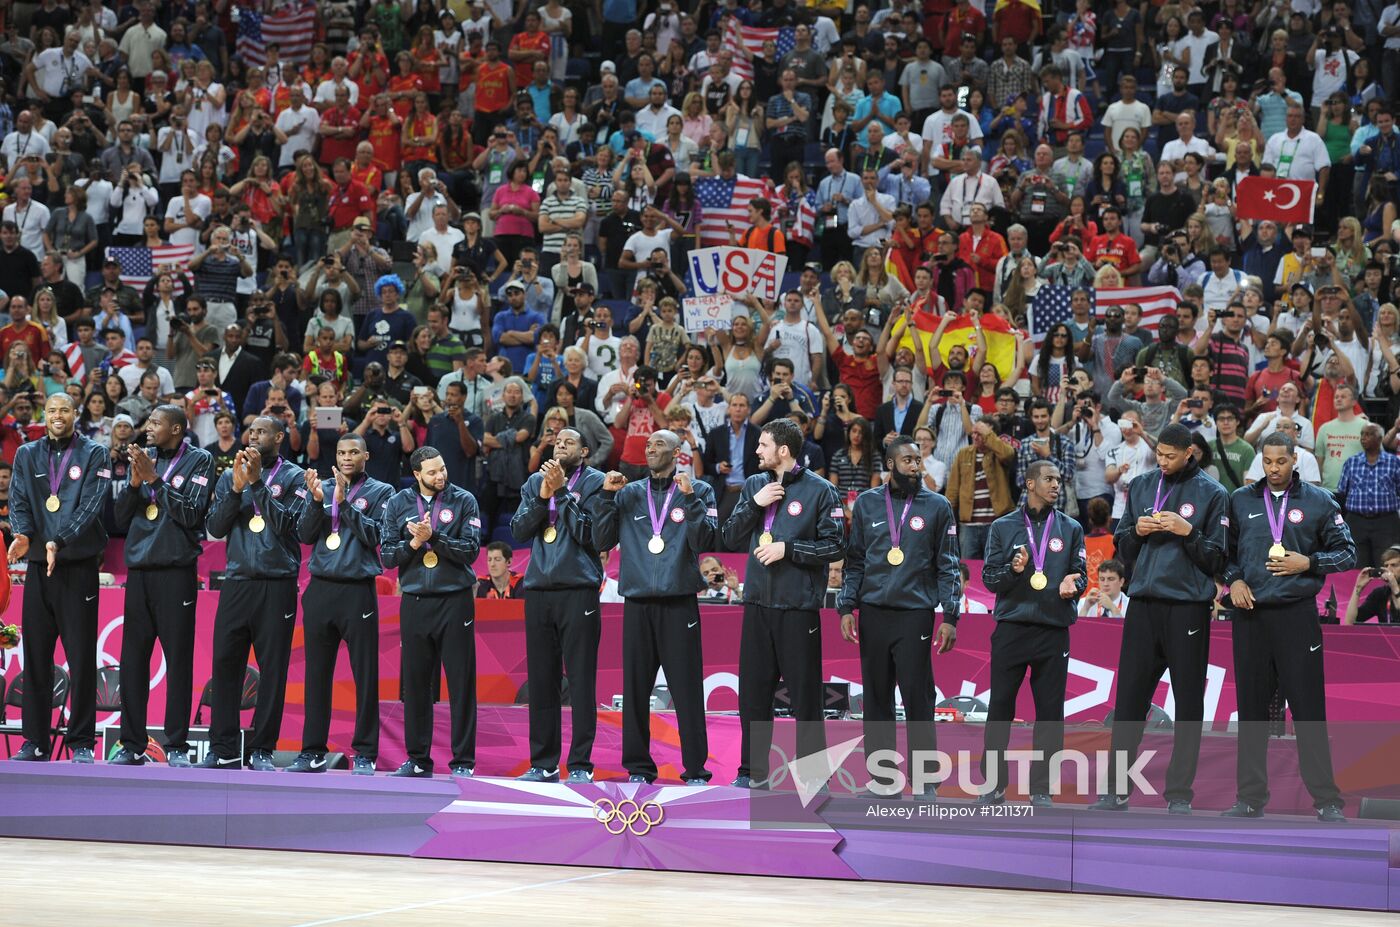 London 2012 Olympics. Men's Volleyball. United States vs. Spain